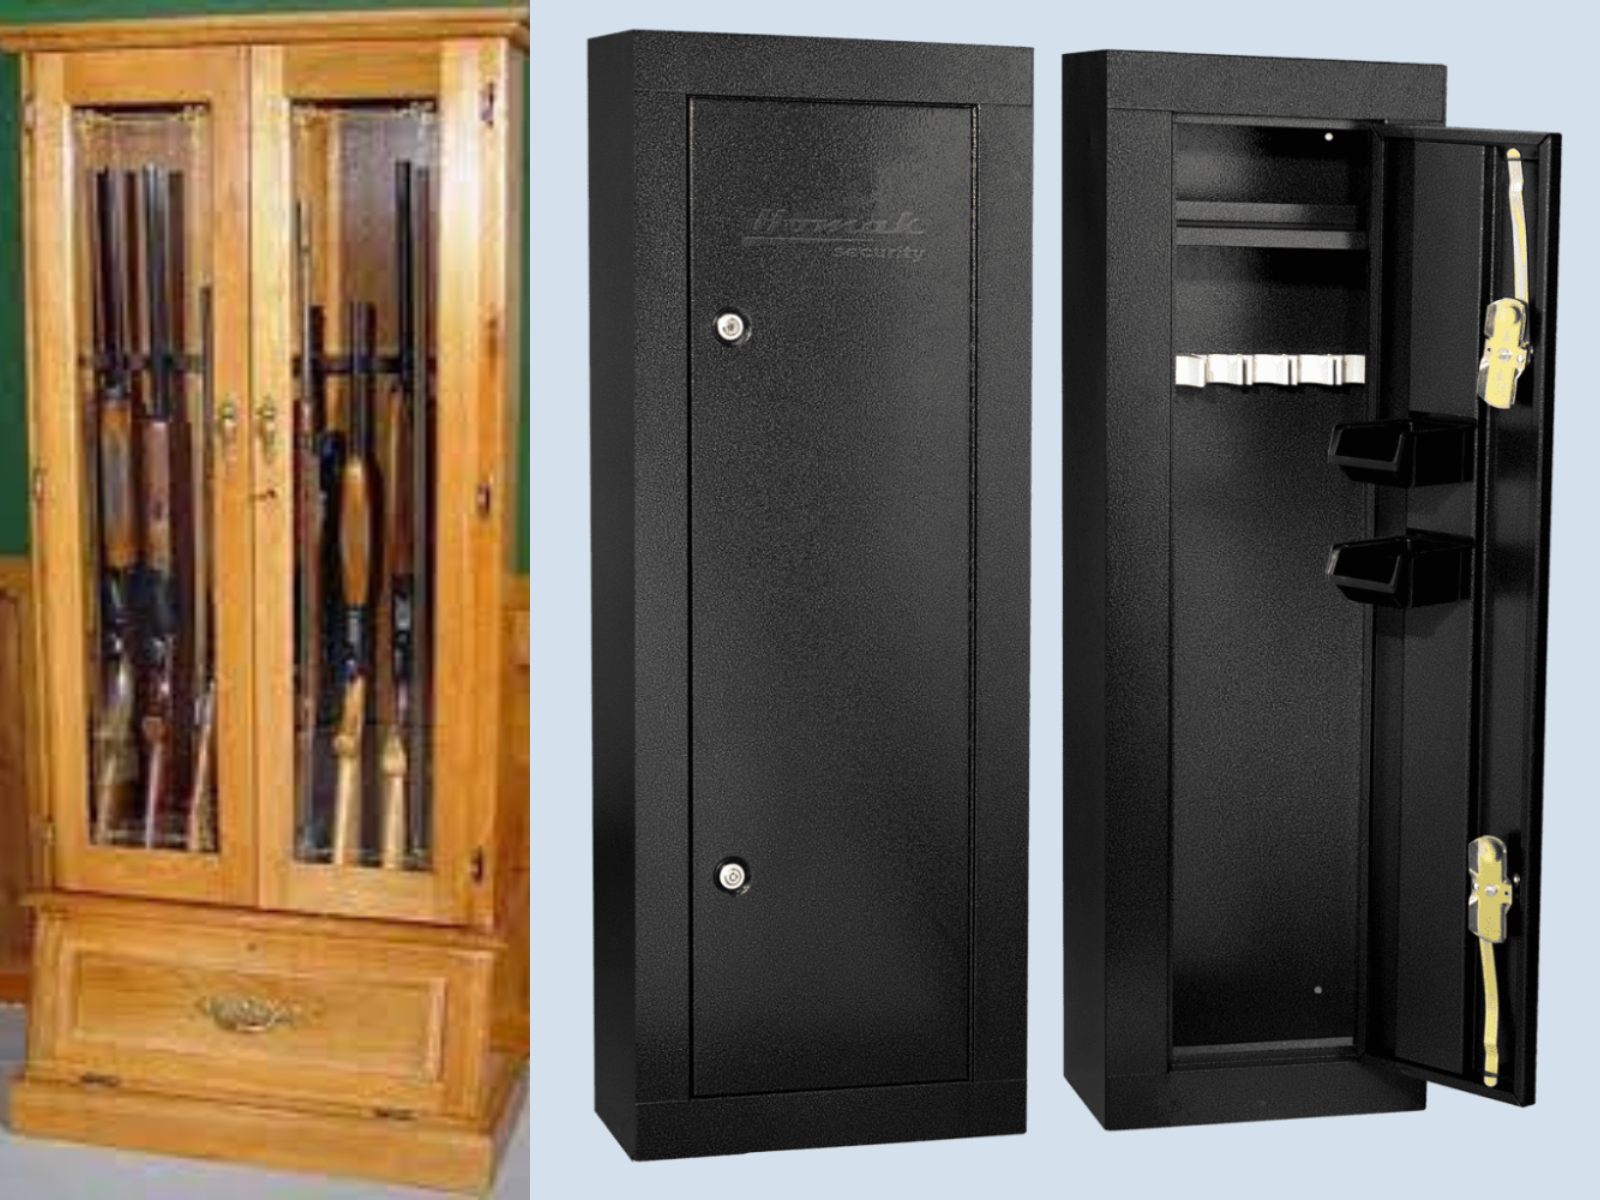 A wood gun cabinet full of guns and a steel gun cabinet showing the interior and exterior.